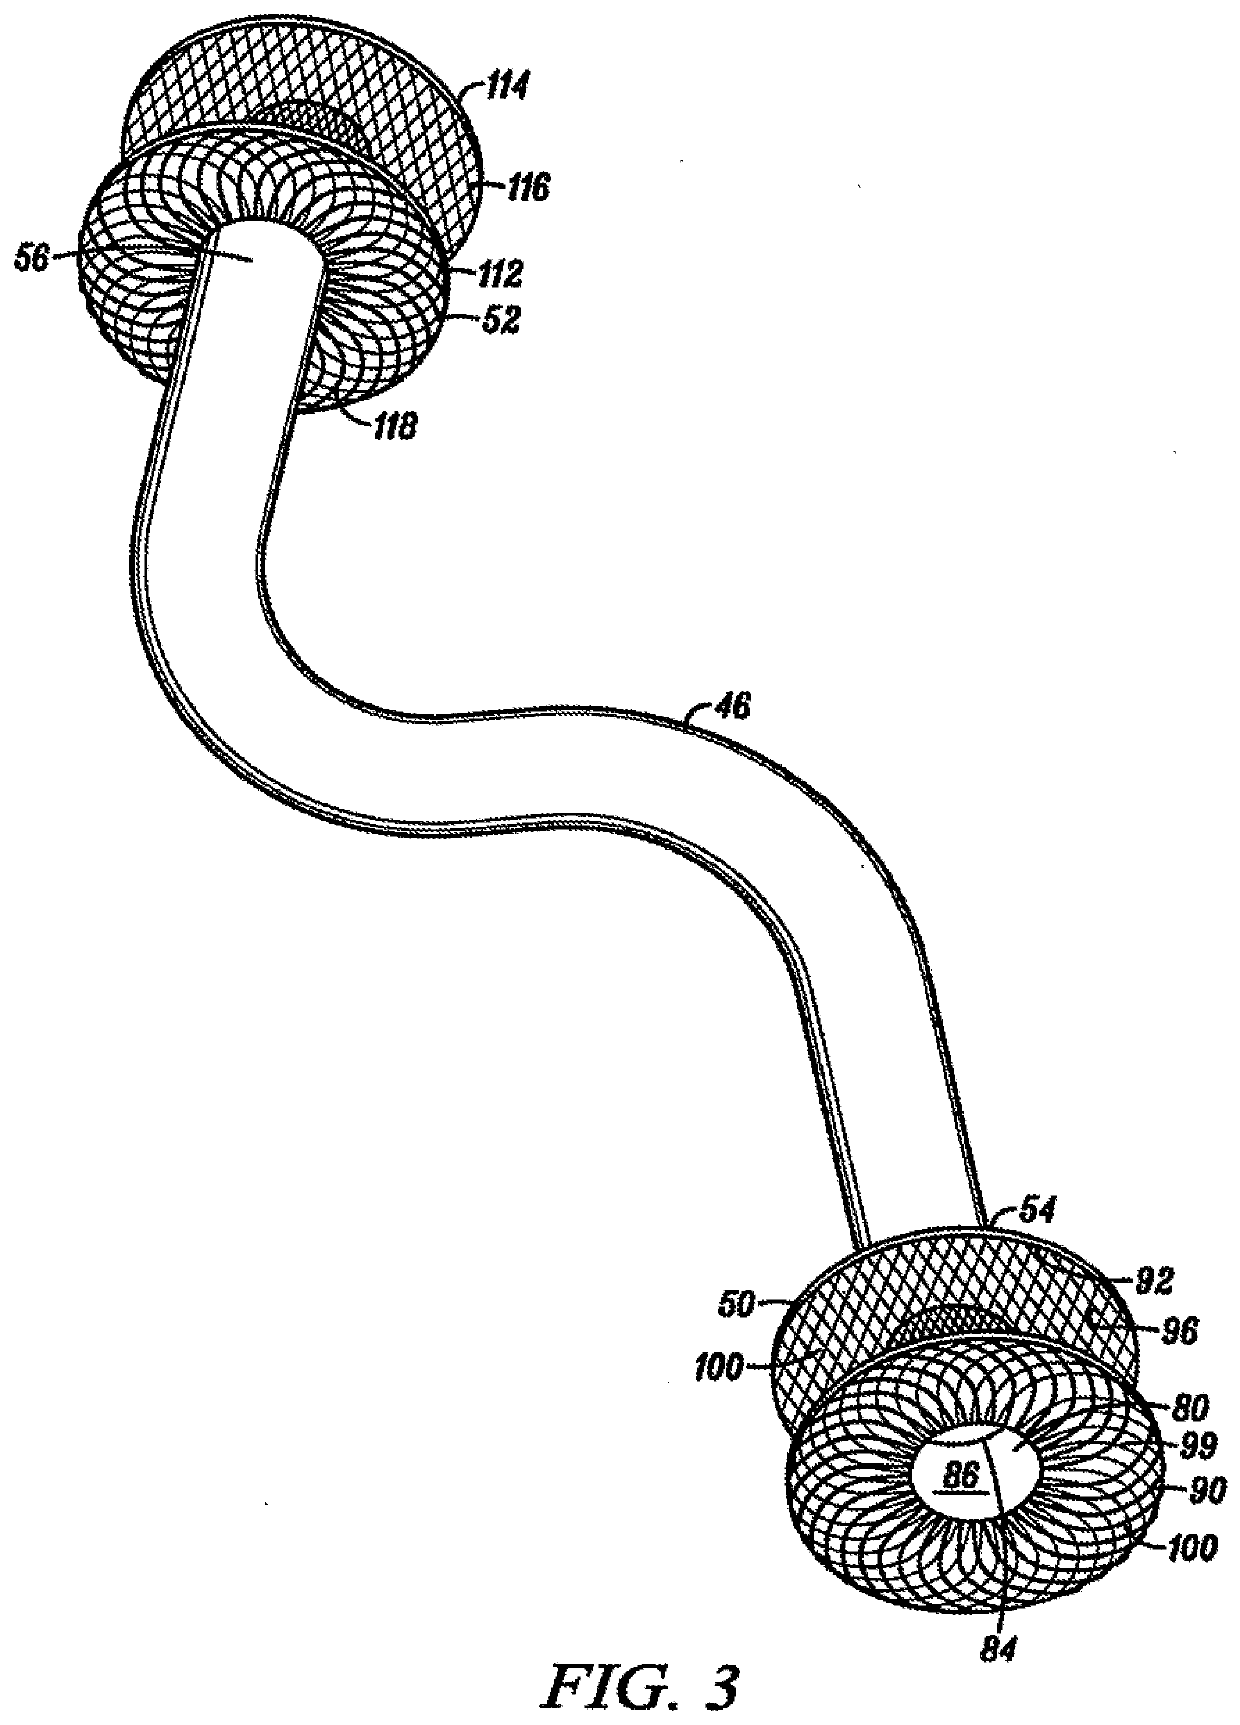 Percutaneous long term left ventricular assist device and non-invasive method for implanting same